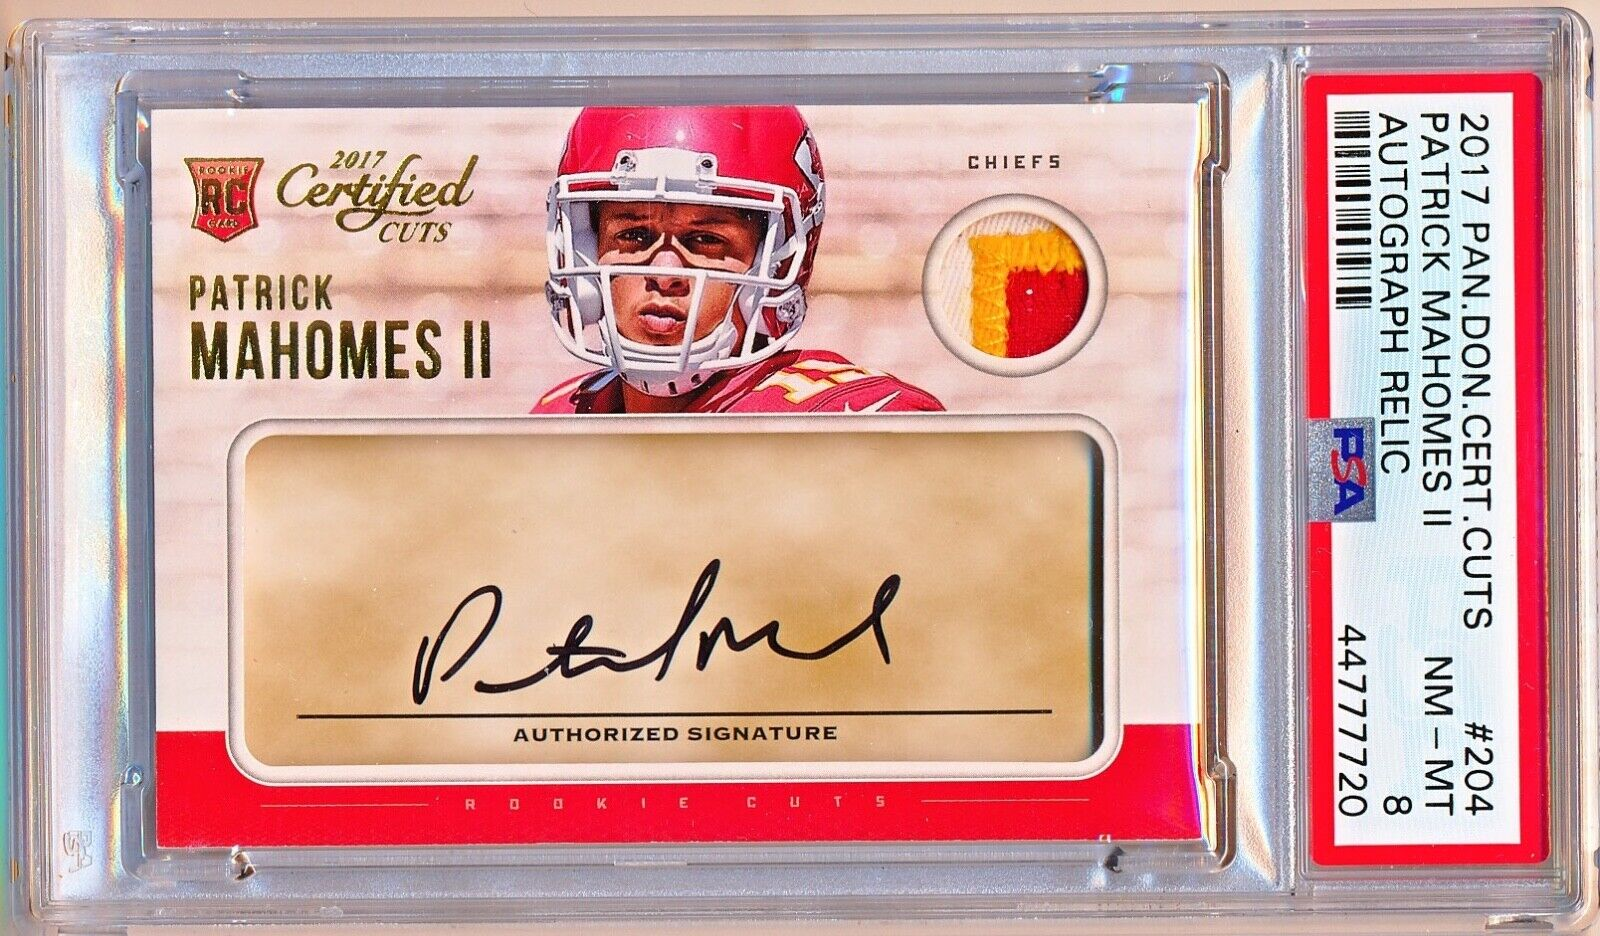 Most valuable Patrick Mahomes rookie cards: 2017 Certified Cuts #204